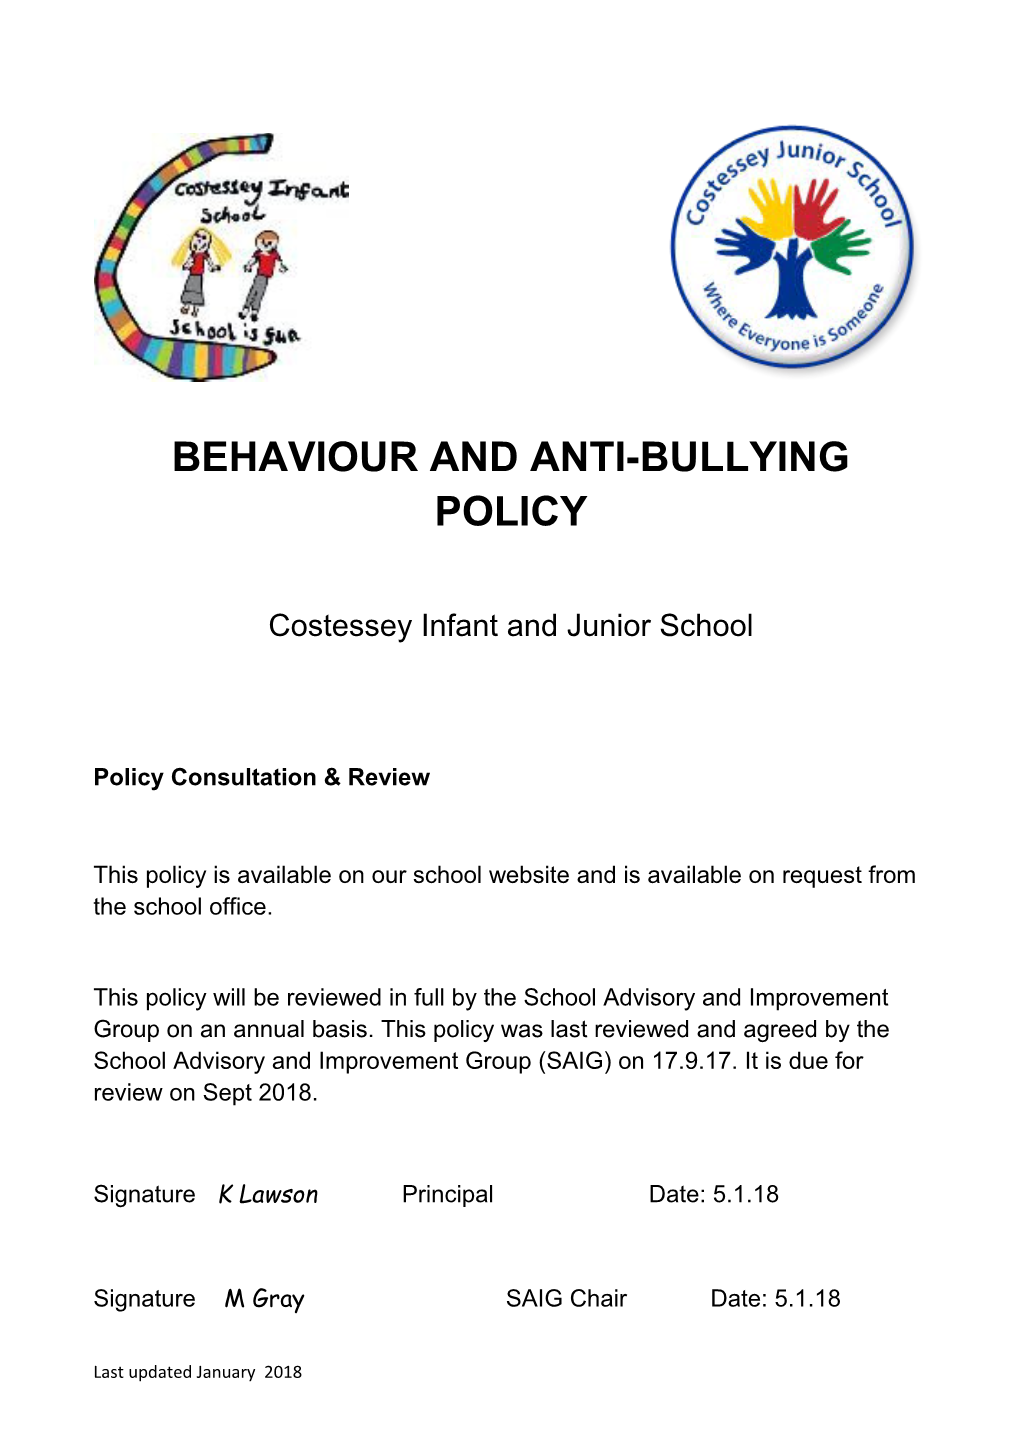 Behaviour and Anti-Bullying Policy